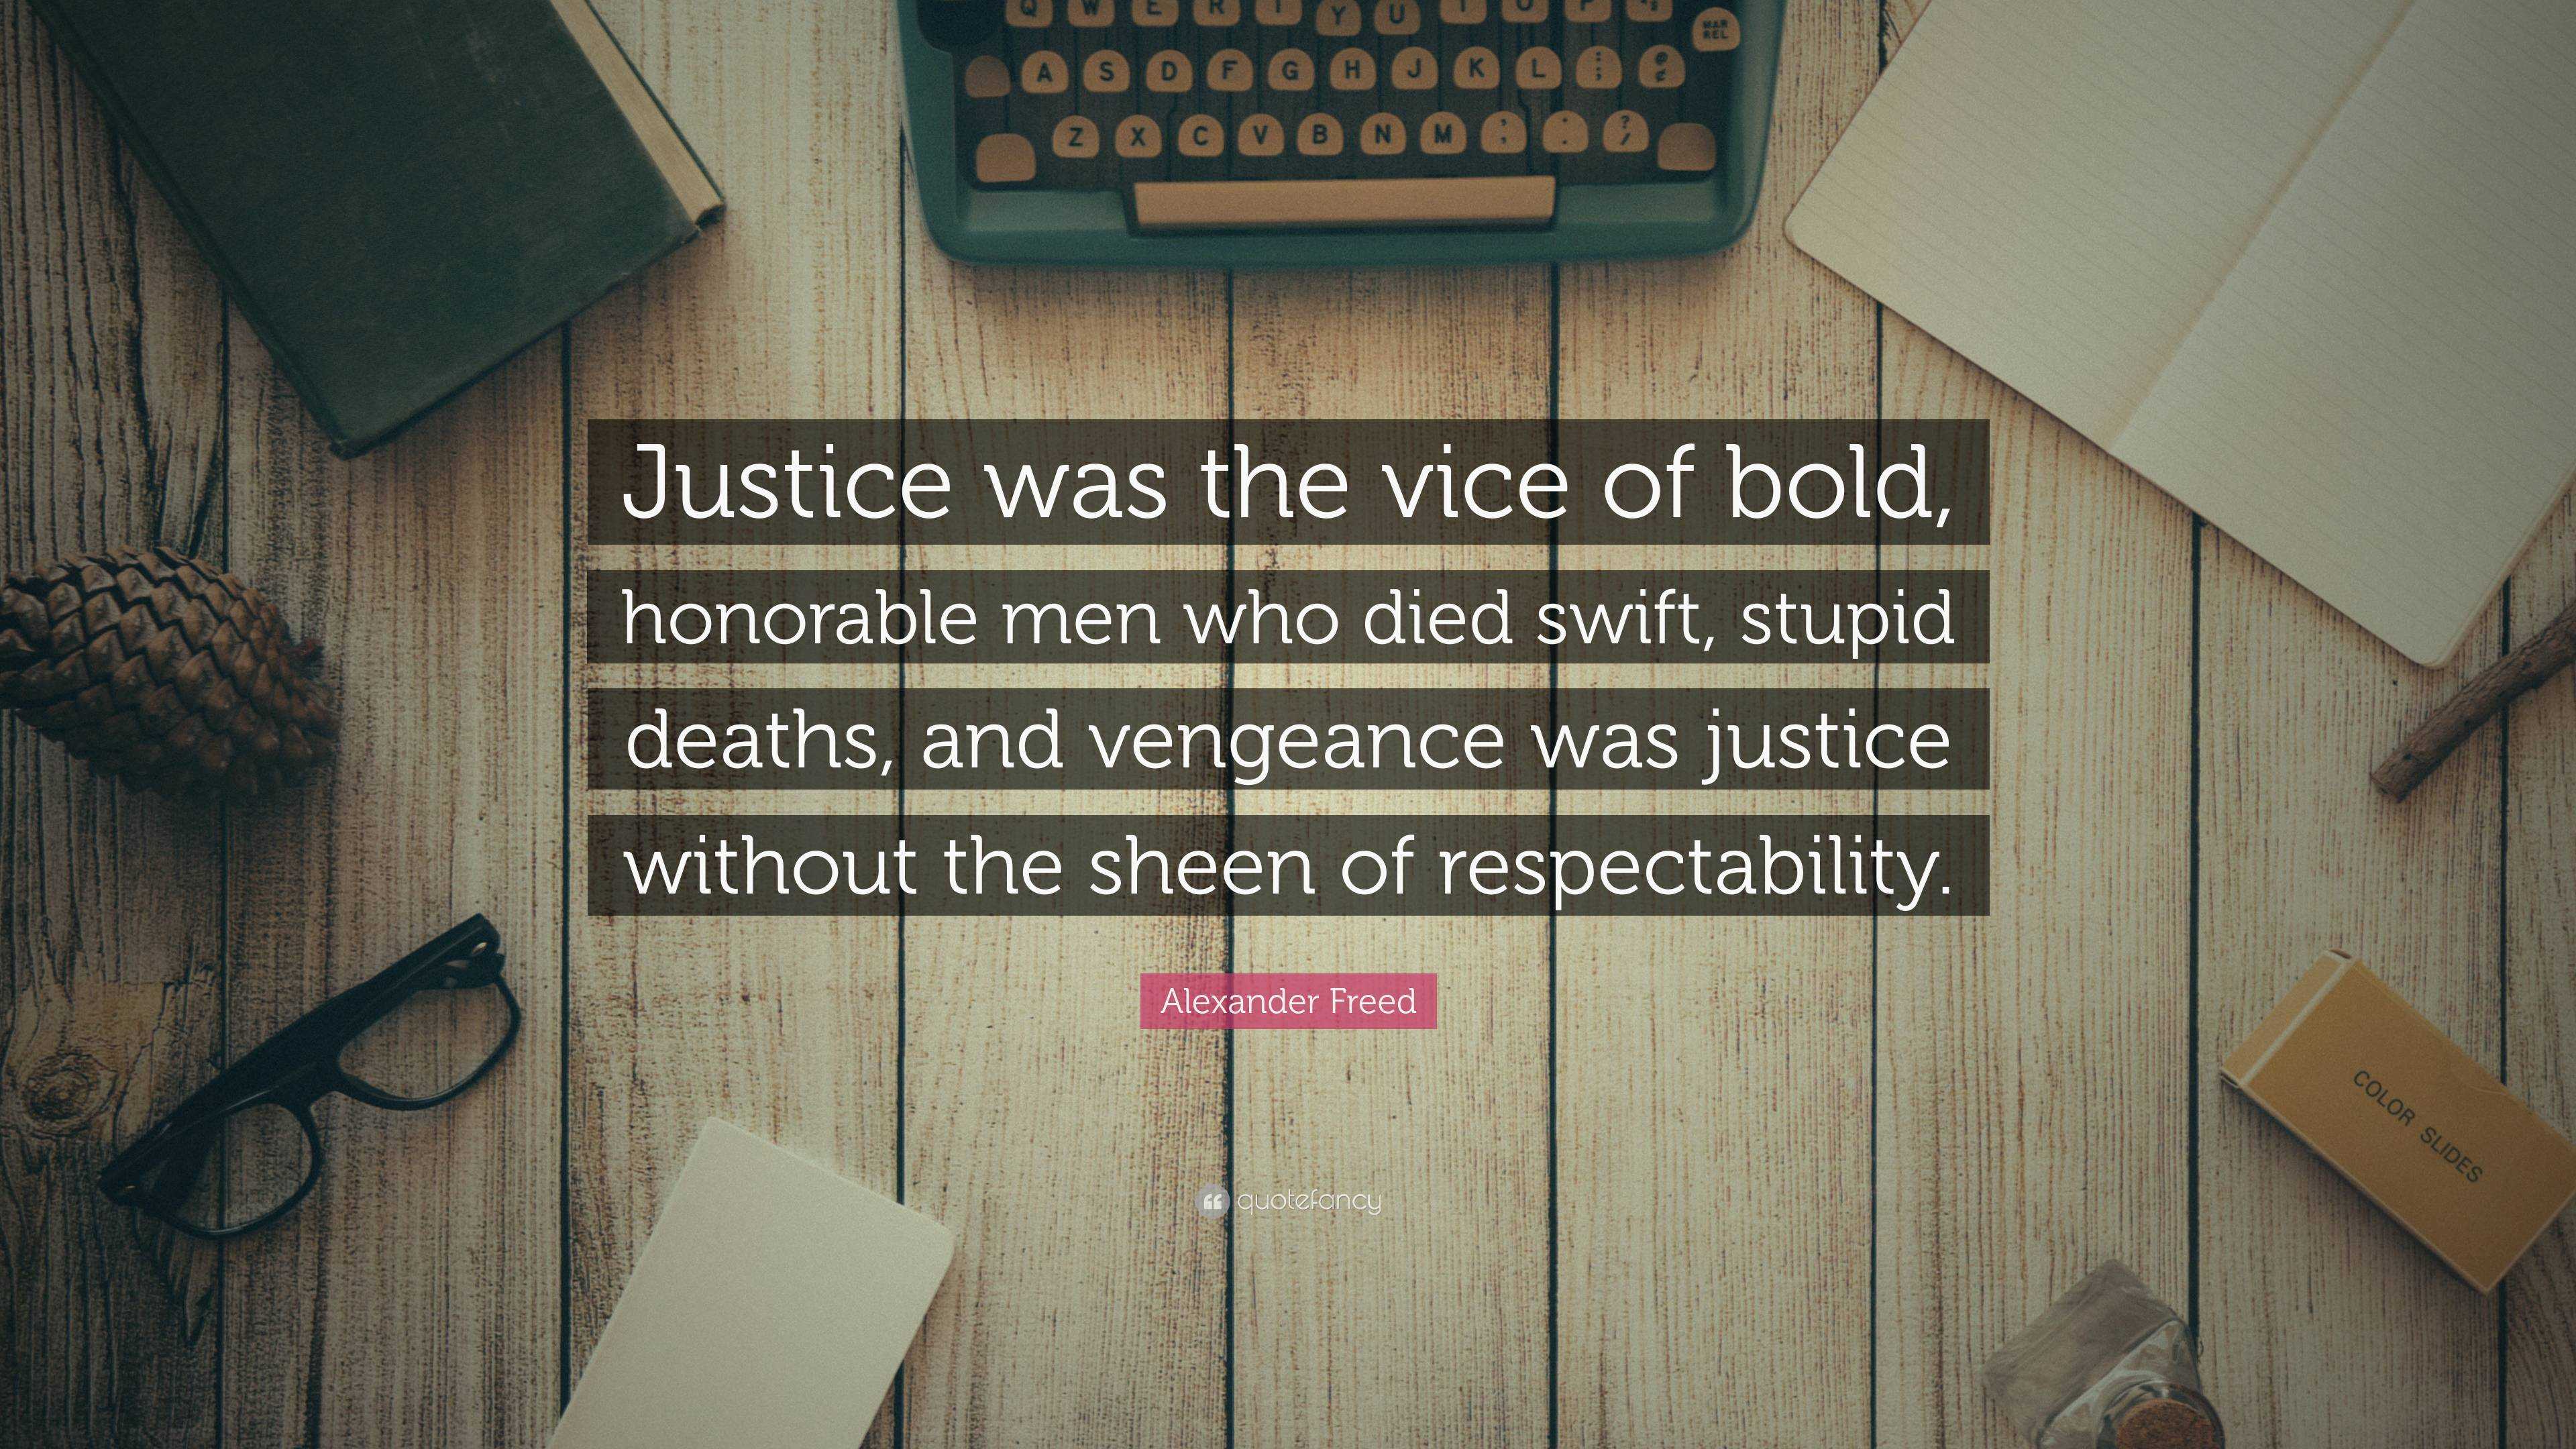 Alexander Freed Quote: “Justice was the vice of bold, honorable